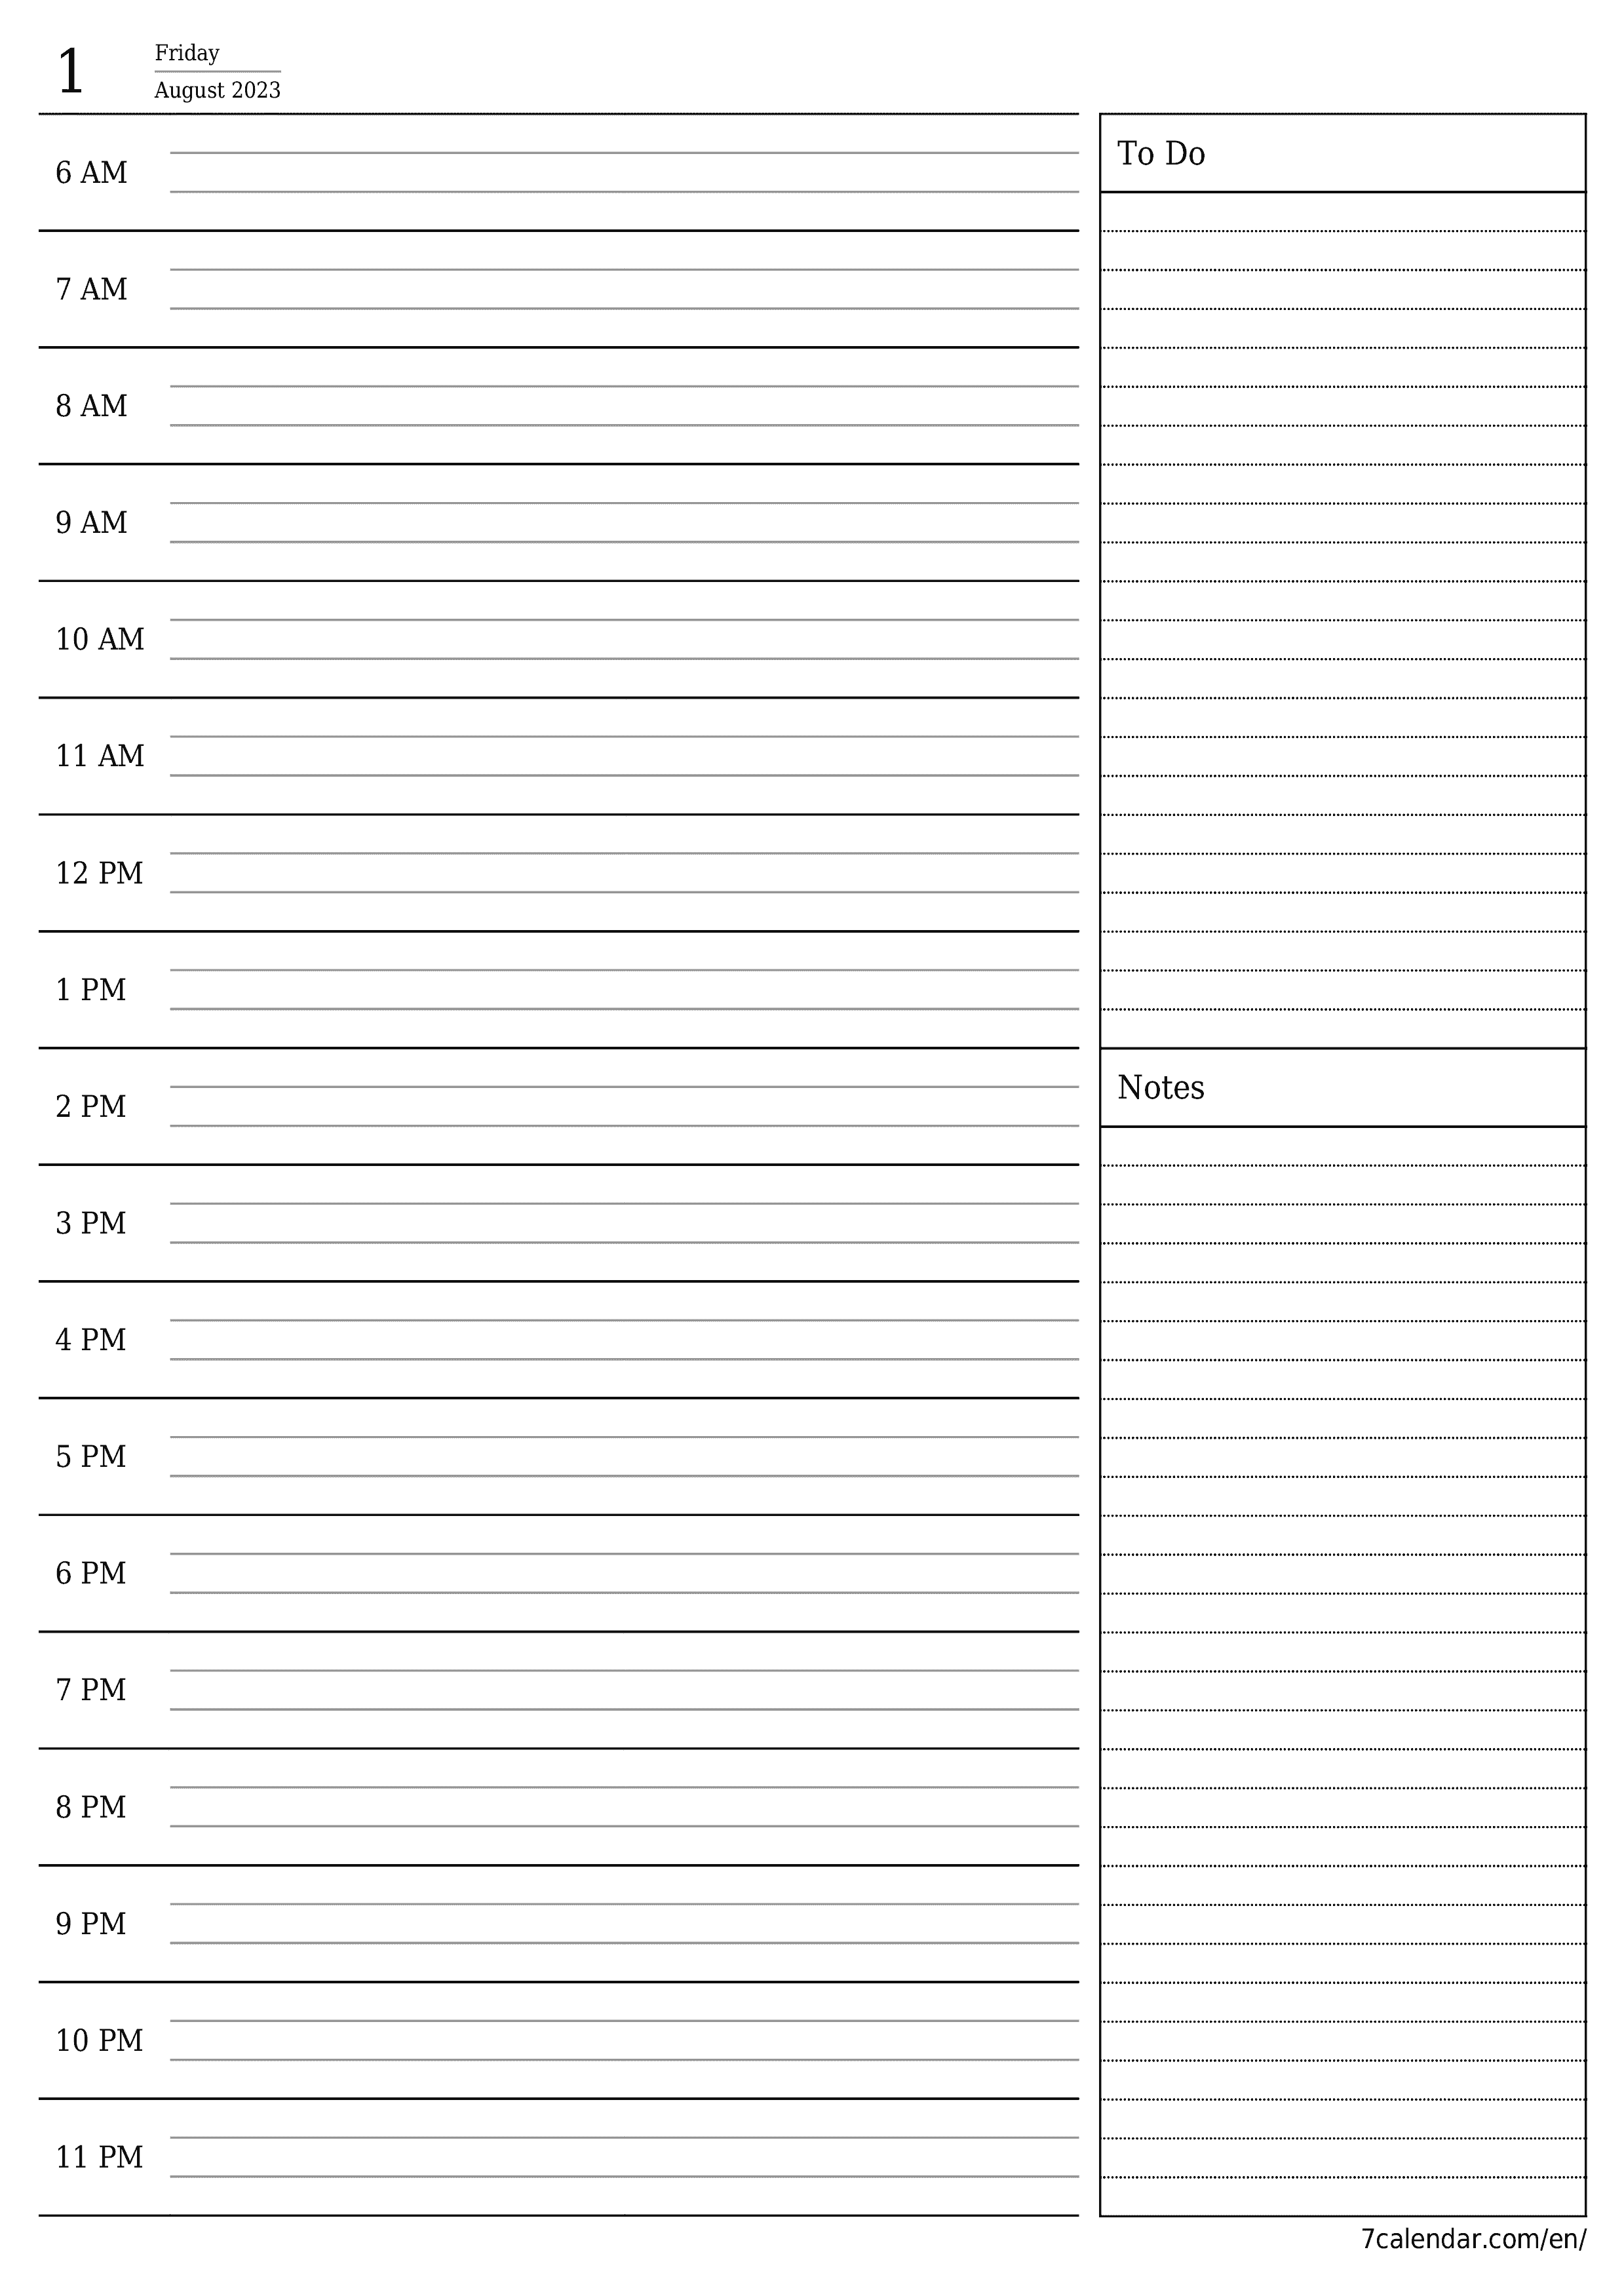 Blank daily printable calendar and planner for day August 2023 with notes, save and print to PDF PNG English - 7calendar.com